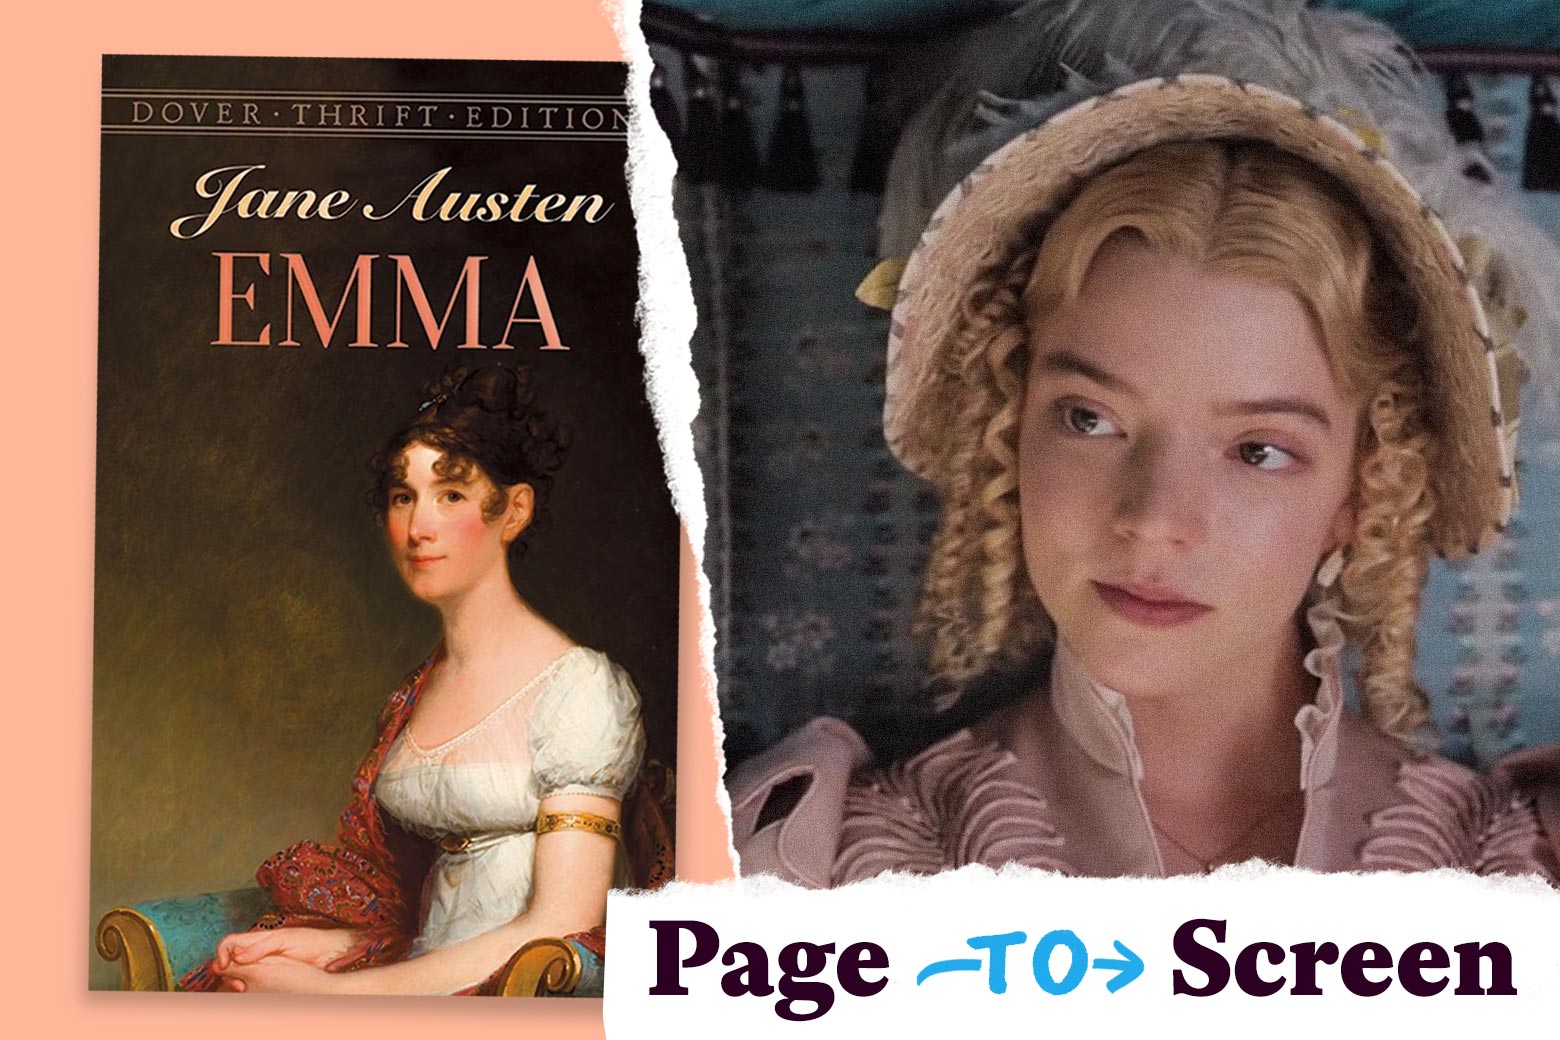 Left: a Dover Thrift Editions copy of Emma by Jane Austen. Right: Anya Taylor-Joy in the 2020 adaptation of Emma. Her hair is in tight, blonde ringlets. A corner logo reads "Page to Screen."